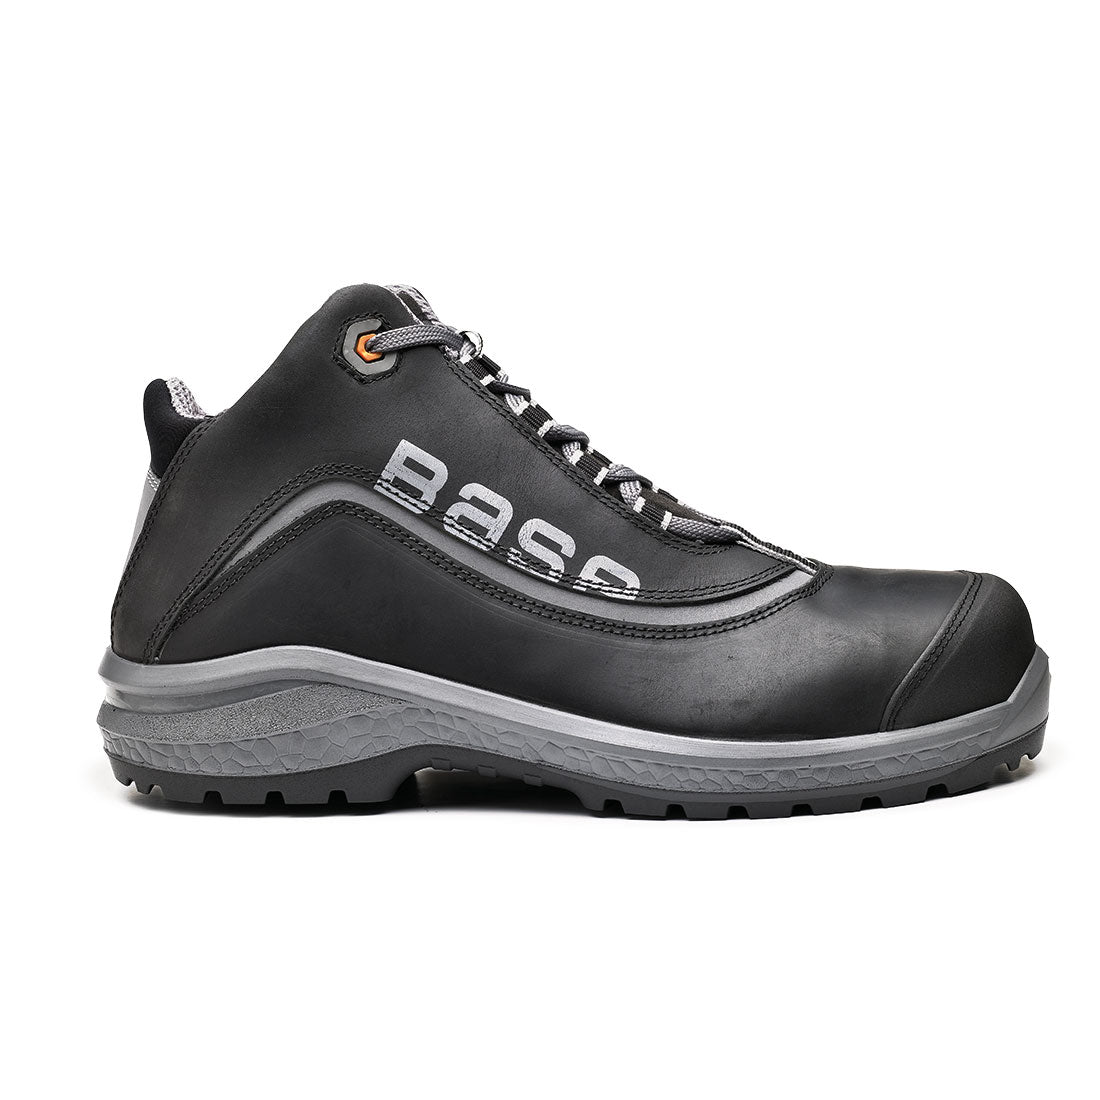 Base Be-Free Top Safety Shoes S3 SRC